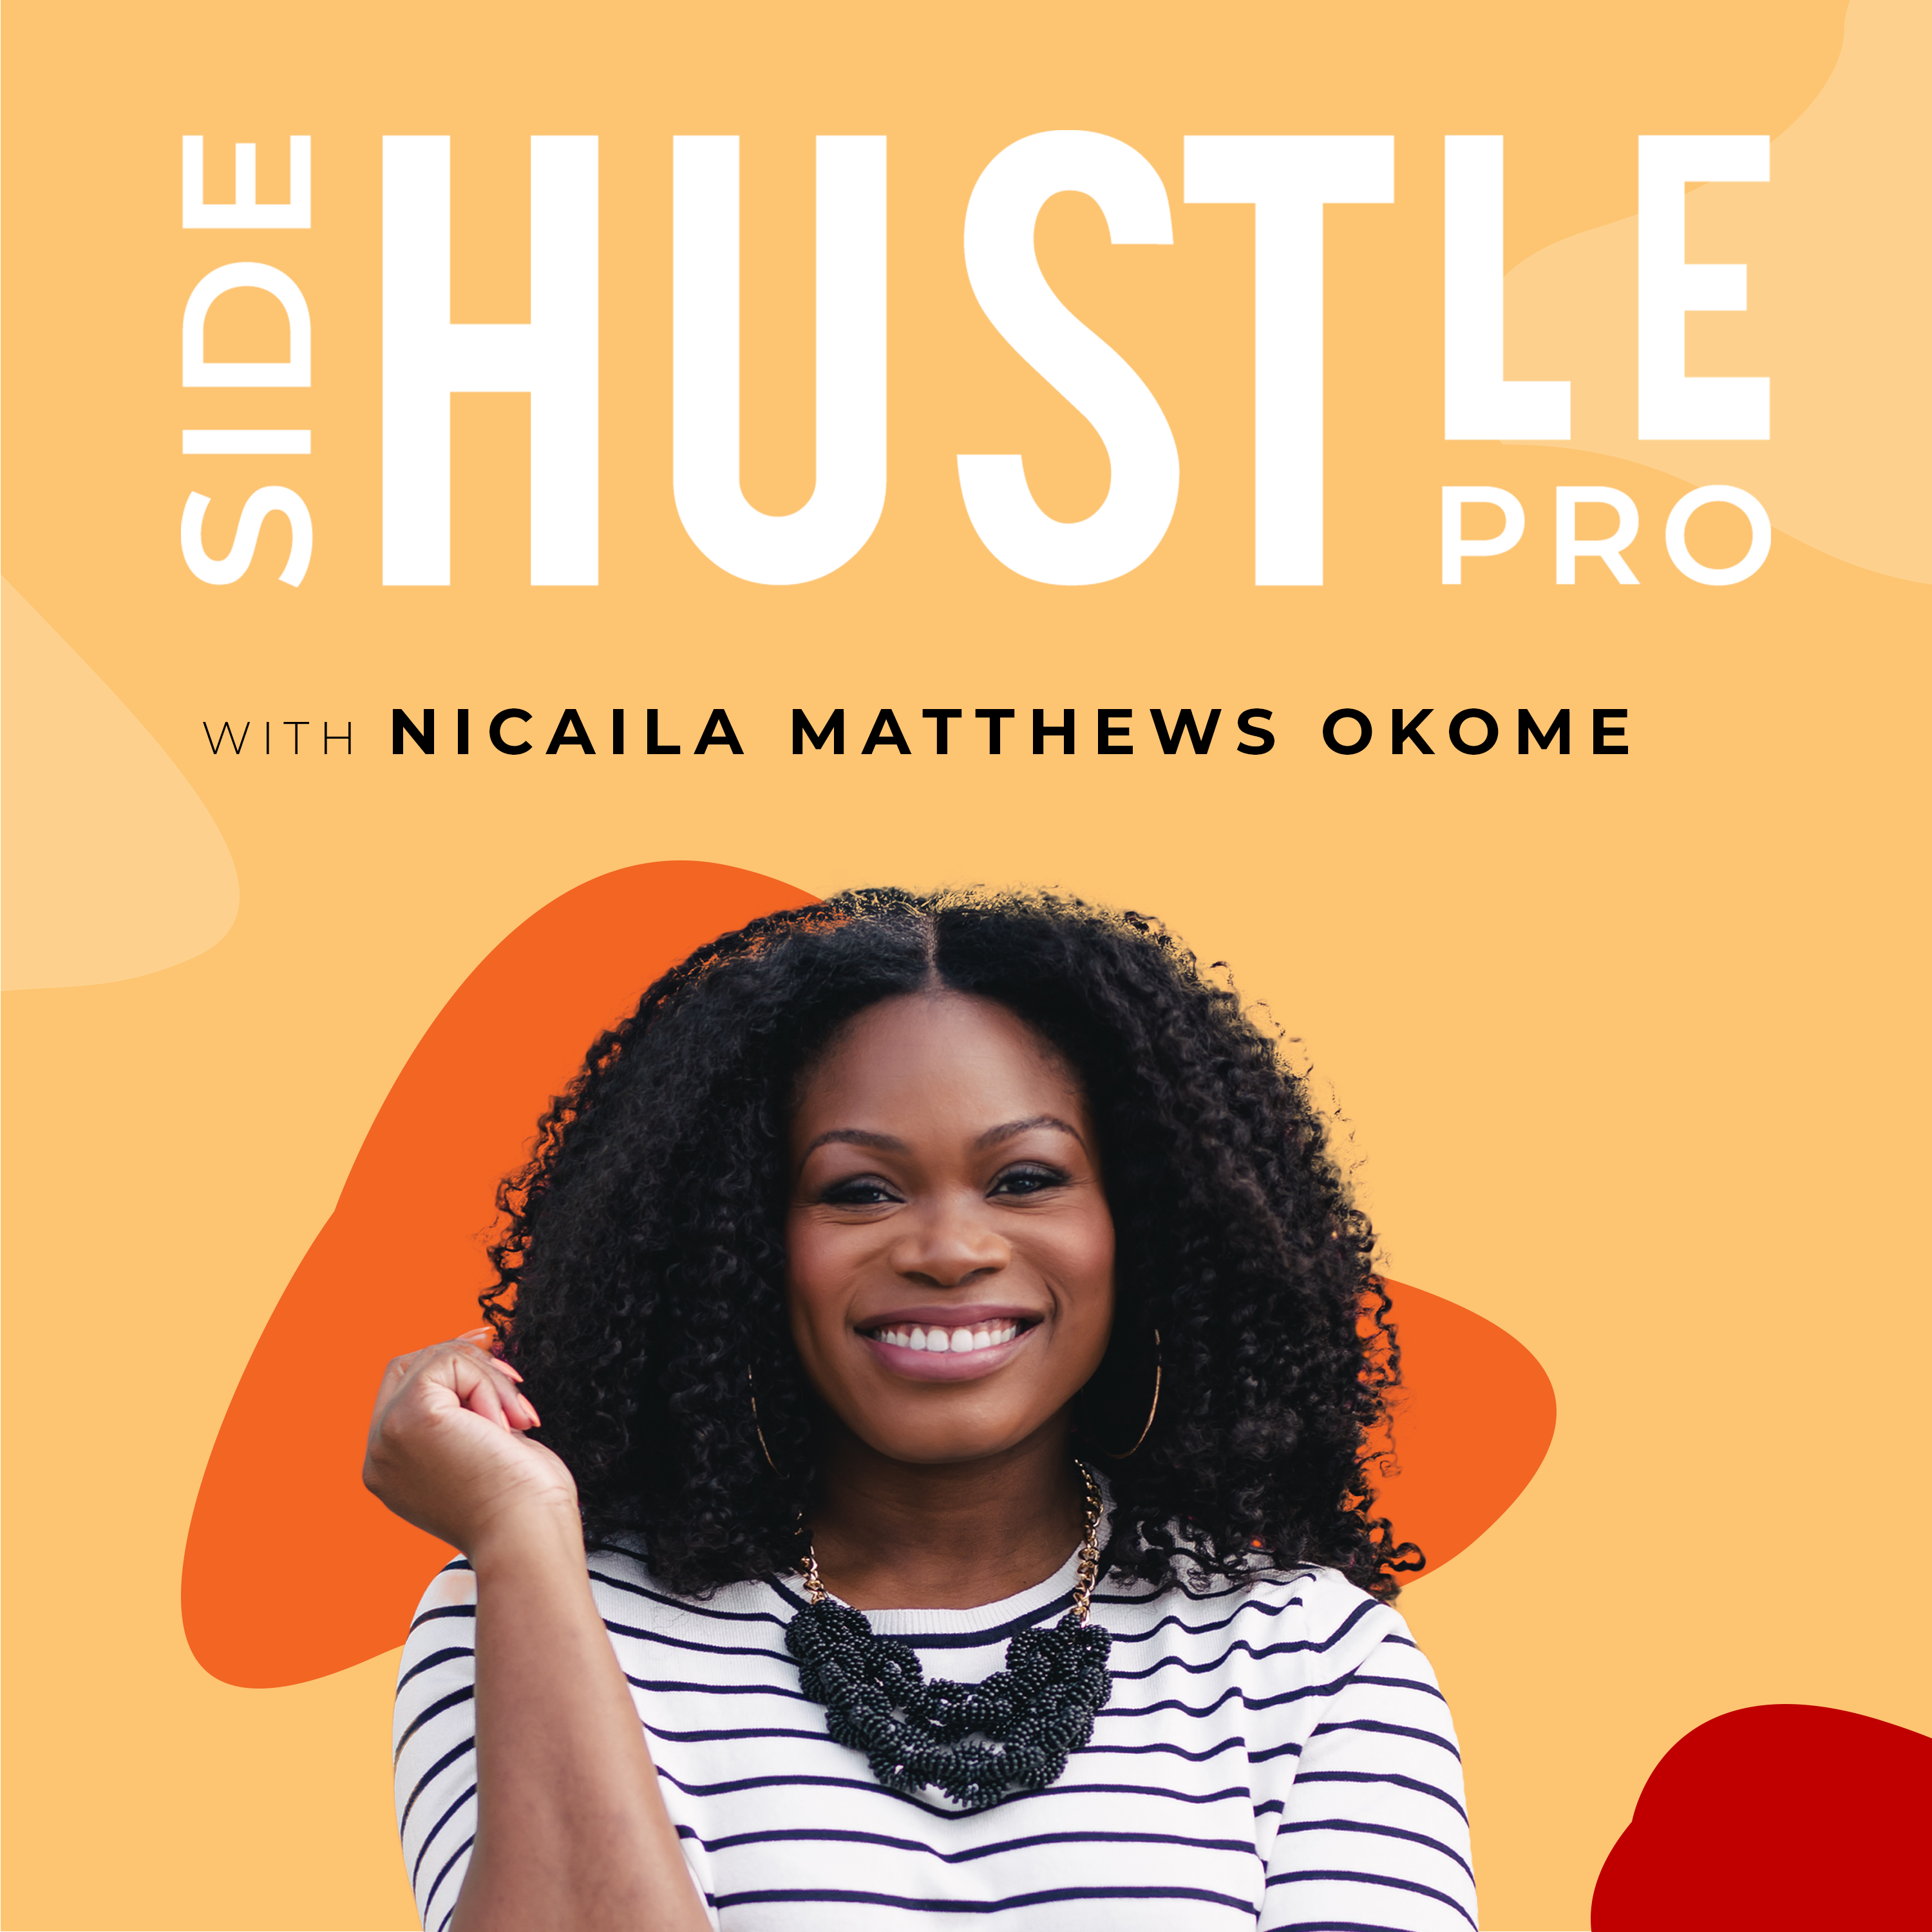 286: My Business & Life Updates for Side Hustle Pro